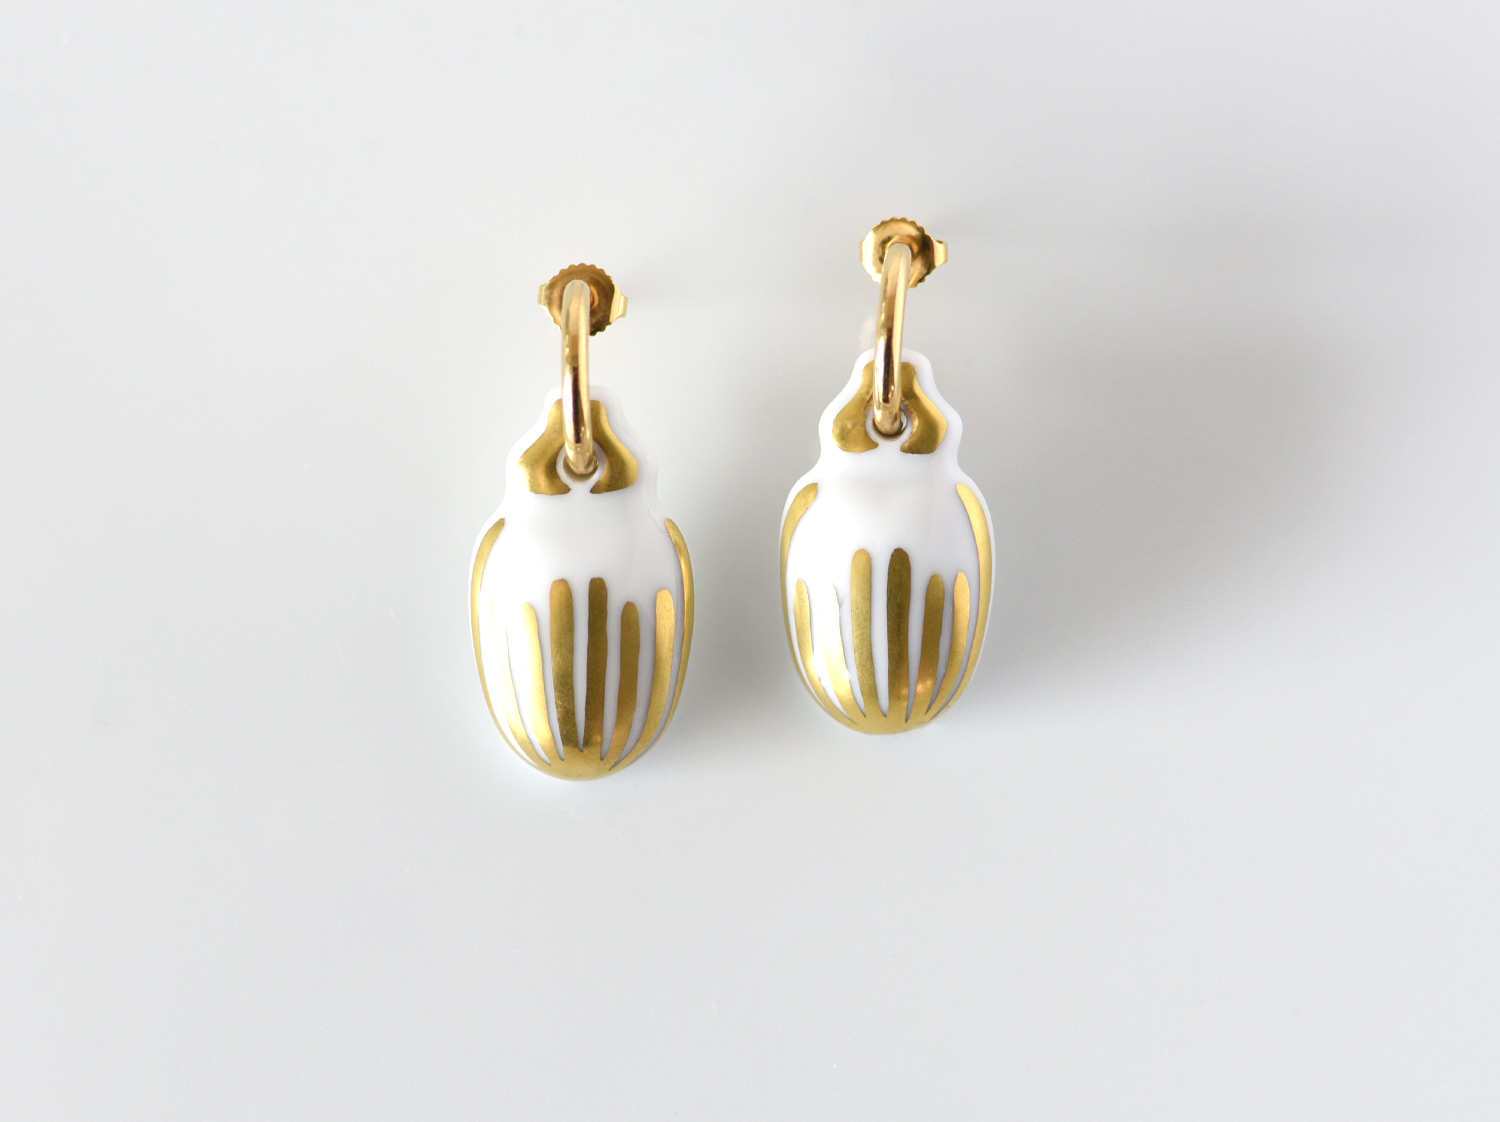 China Scarabée Earrings White & Gold of the collection SCARABEE BLANC OR | Bernardaud